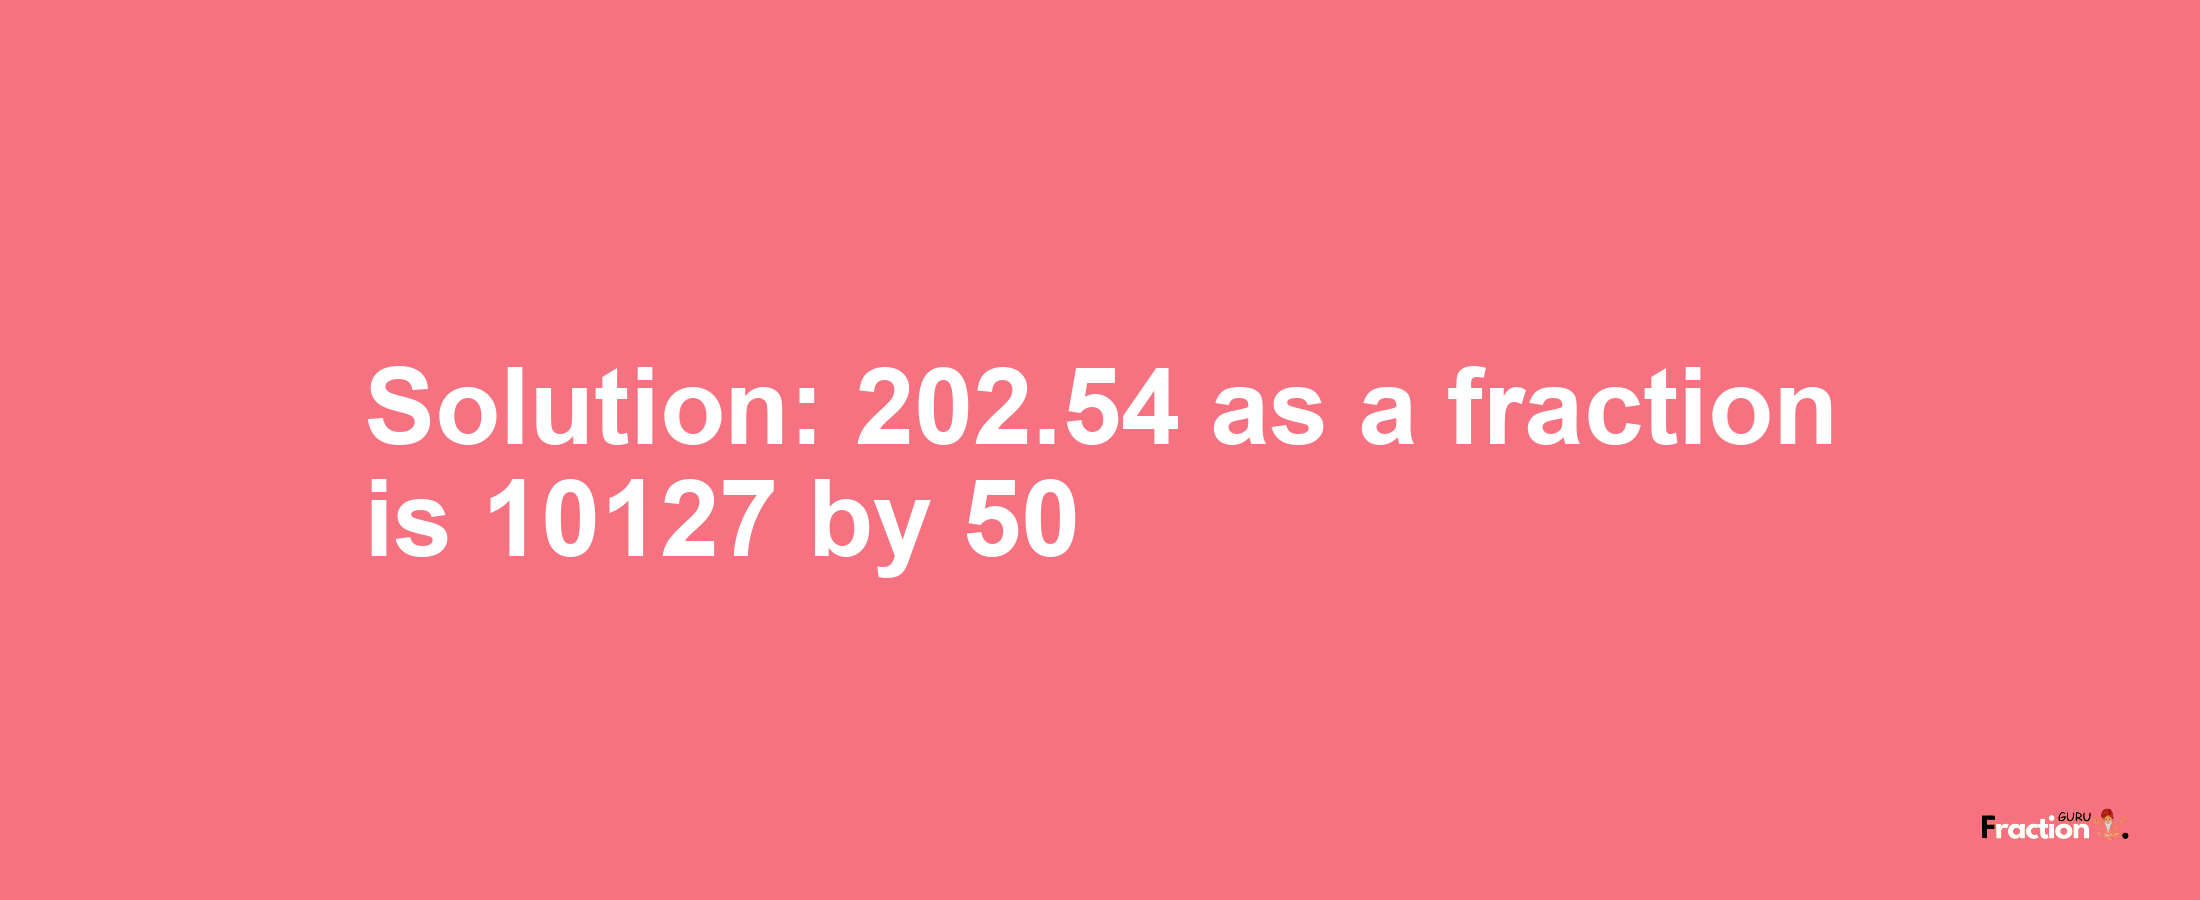 Solution:202.54 as a fraction is 10127/50